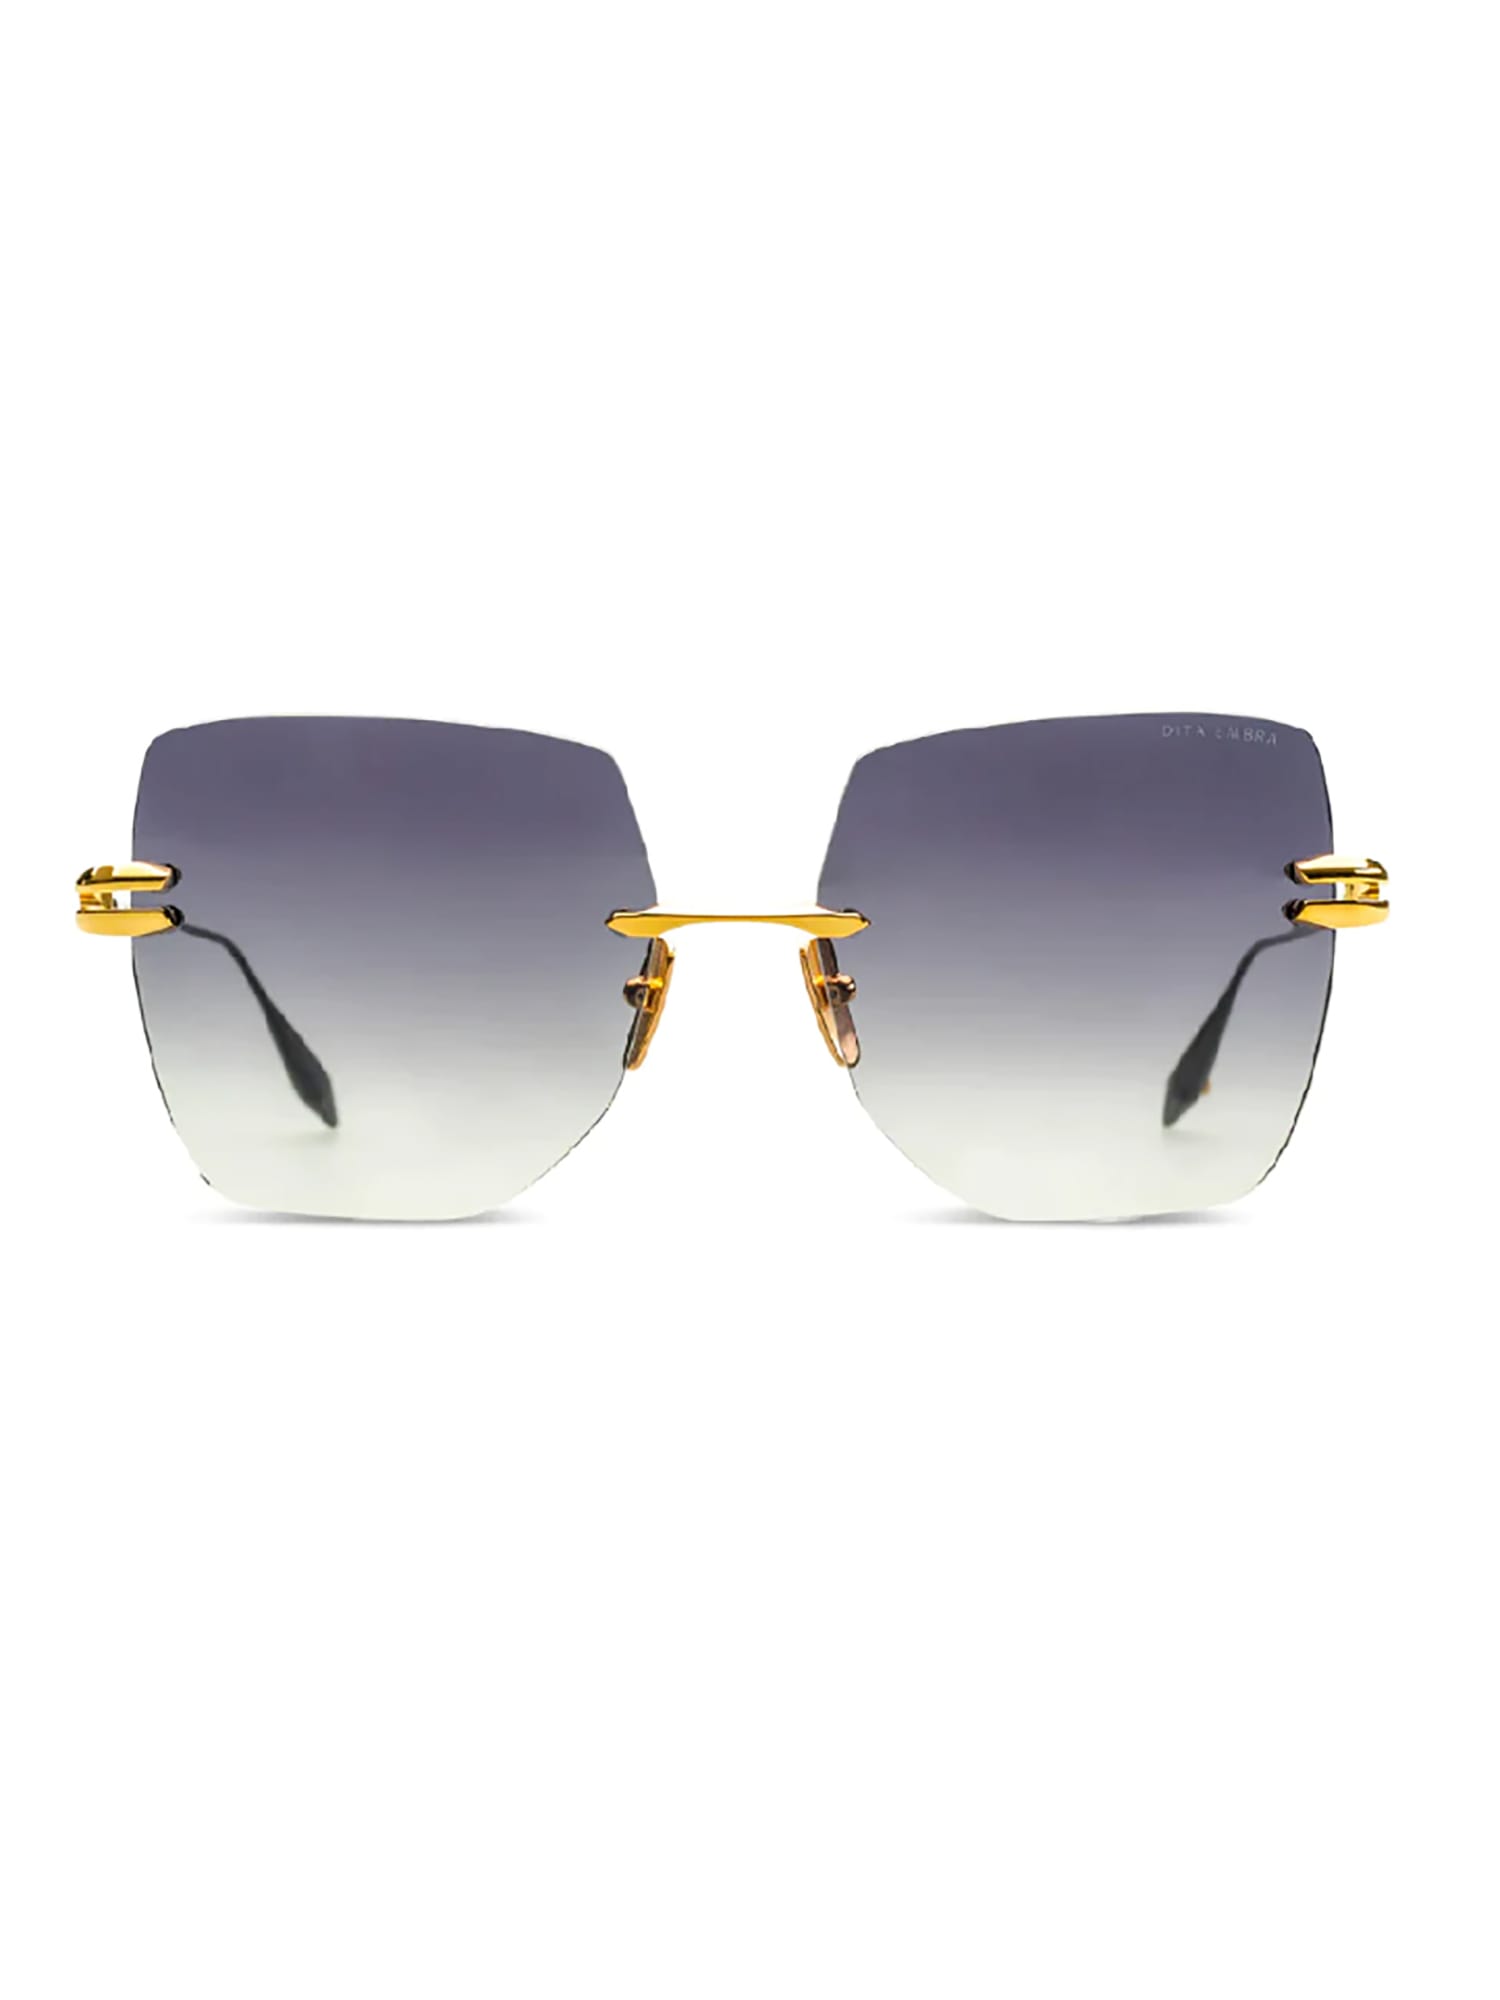 Dita Embra Dts155-a-01 Butterfly Sunglasses In Yellow Gold_black Rhodium